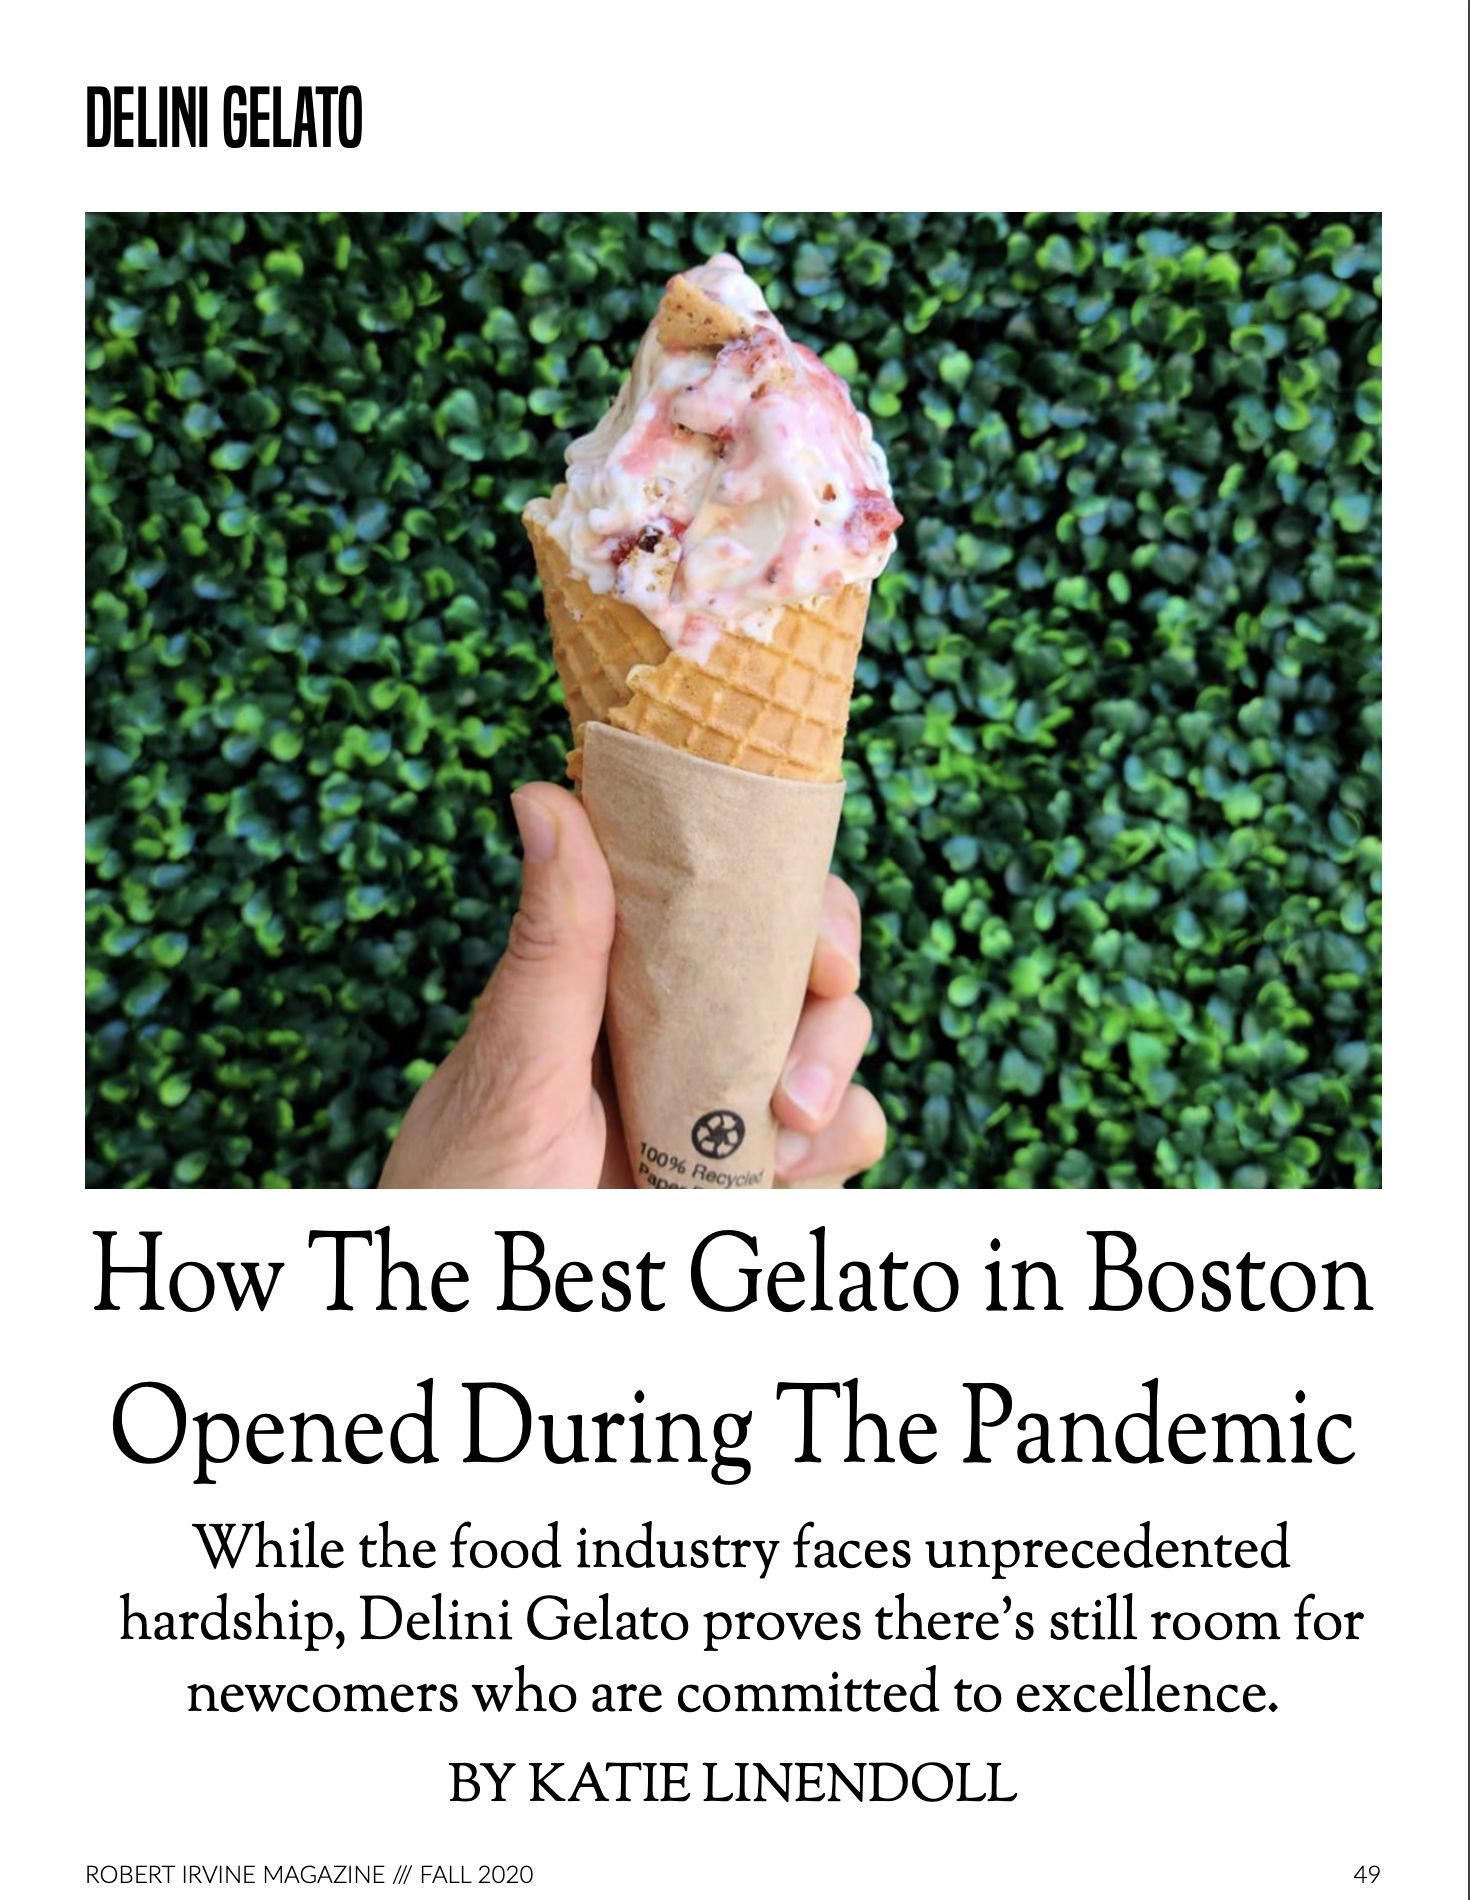 How the best gelato in Boston opened During the pandemic title ice cream